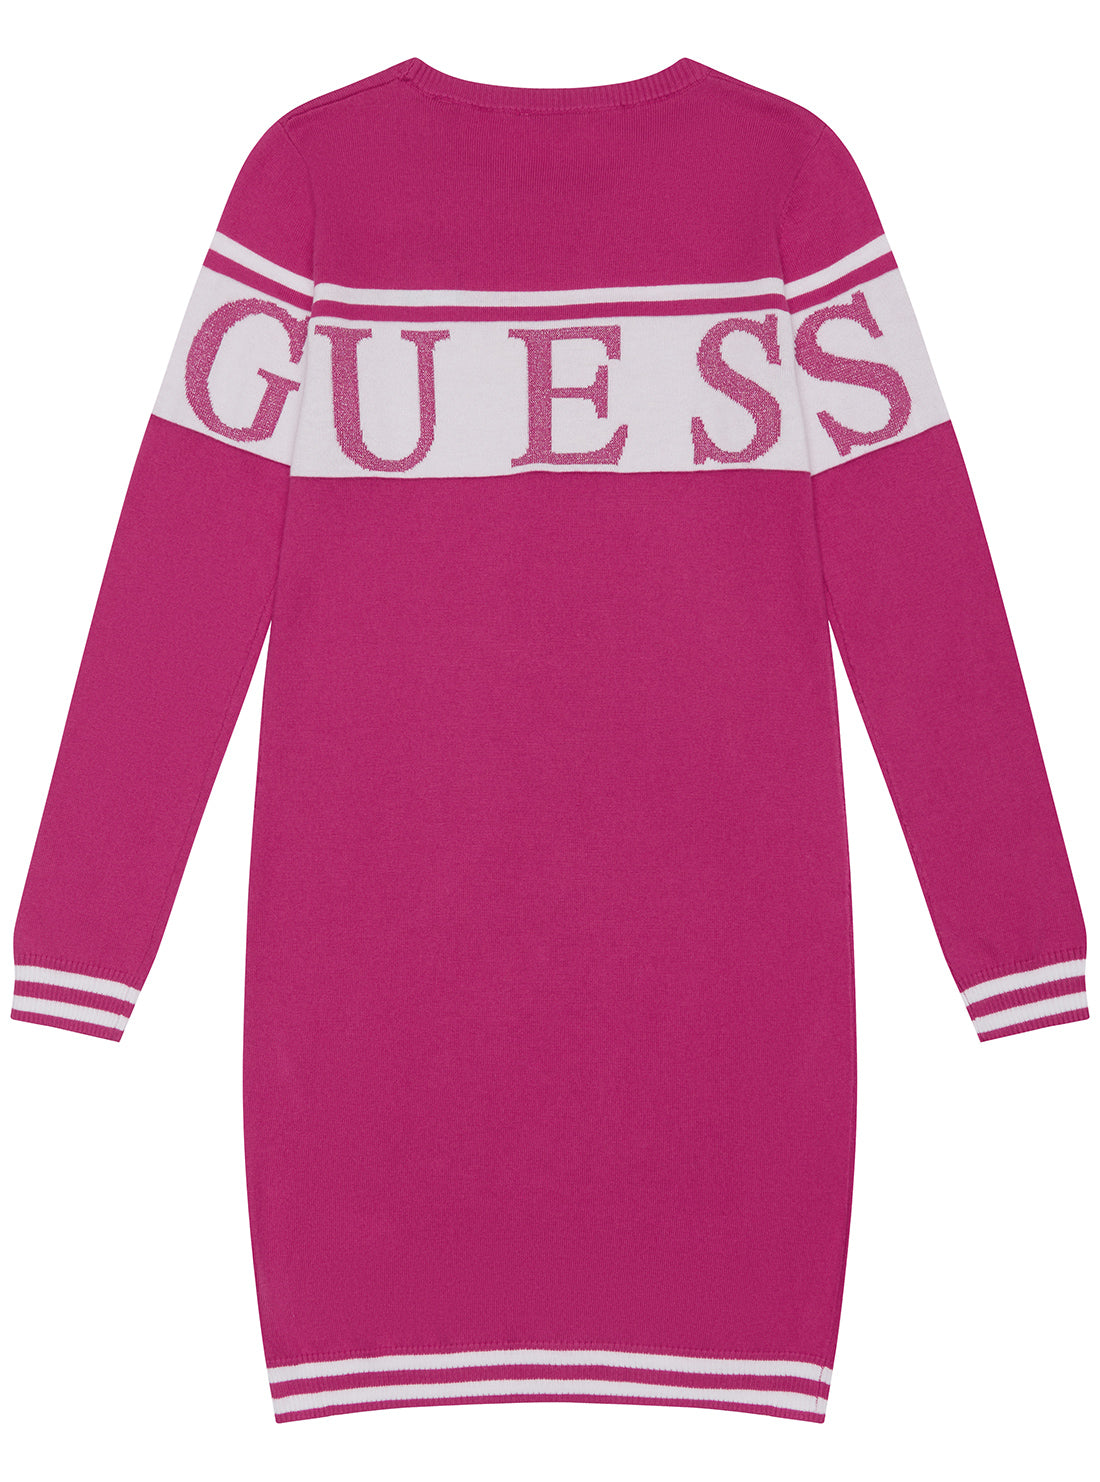 GUESS Pink Long Sleeve Knit Dress (7-16) back view